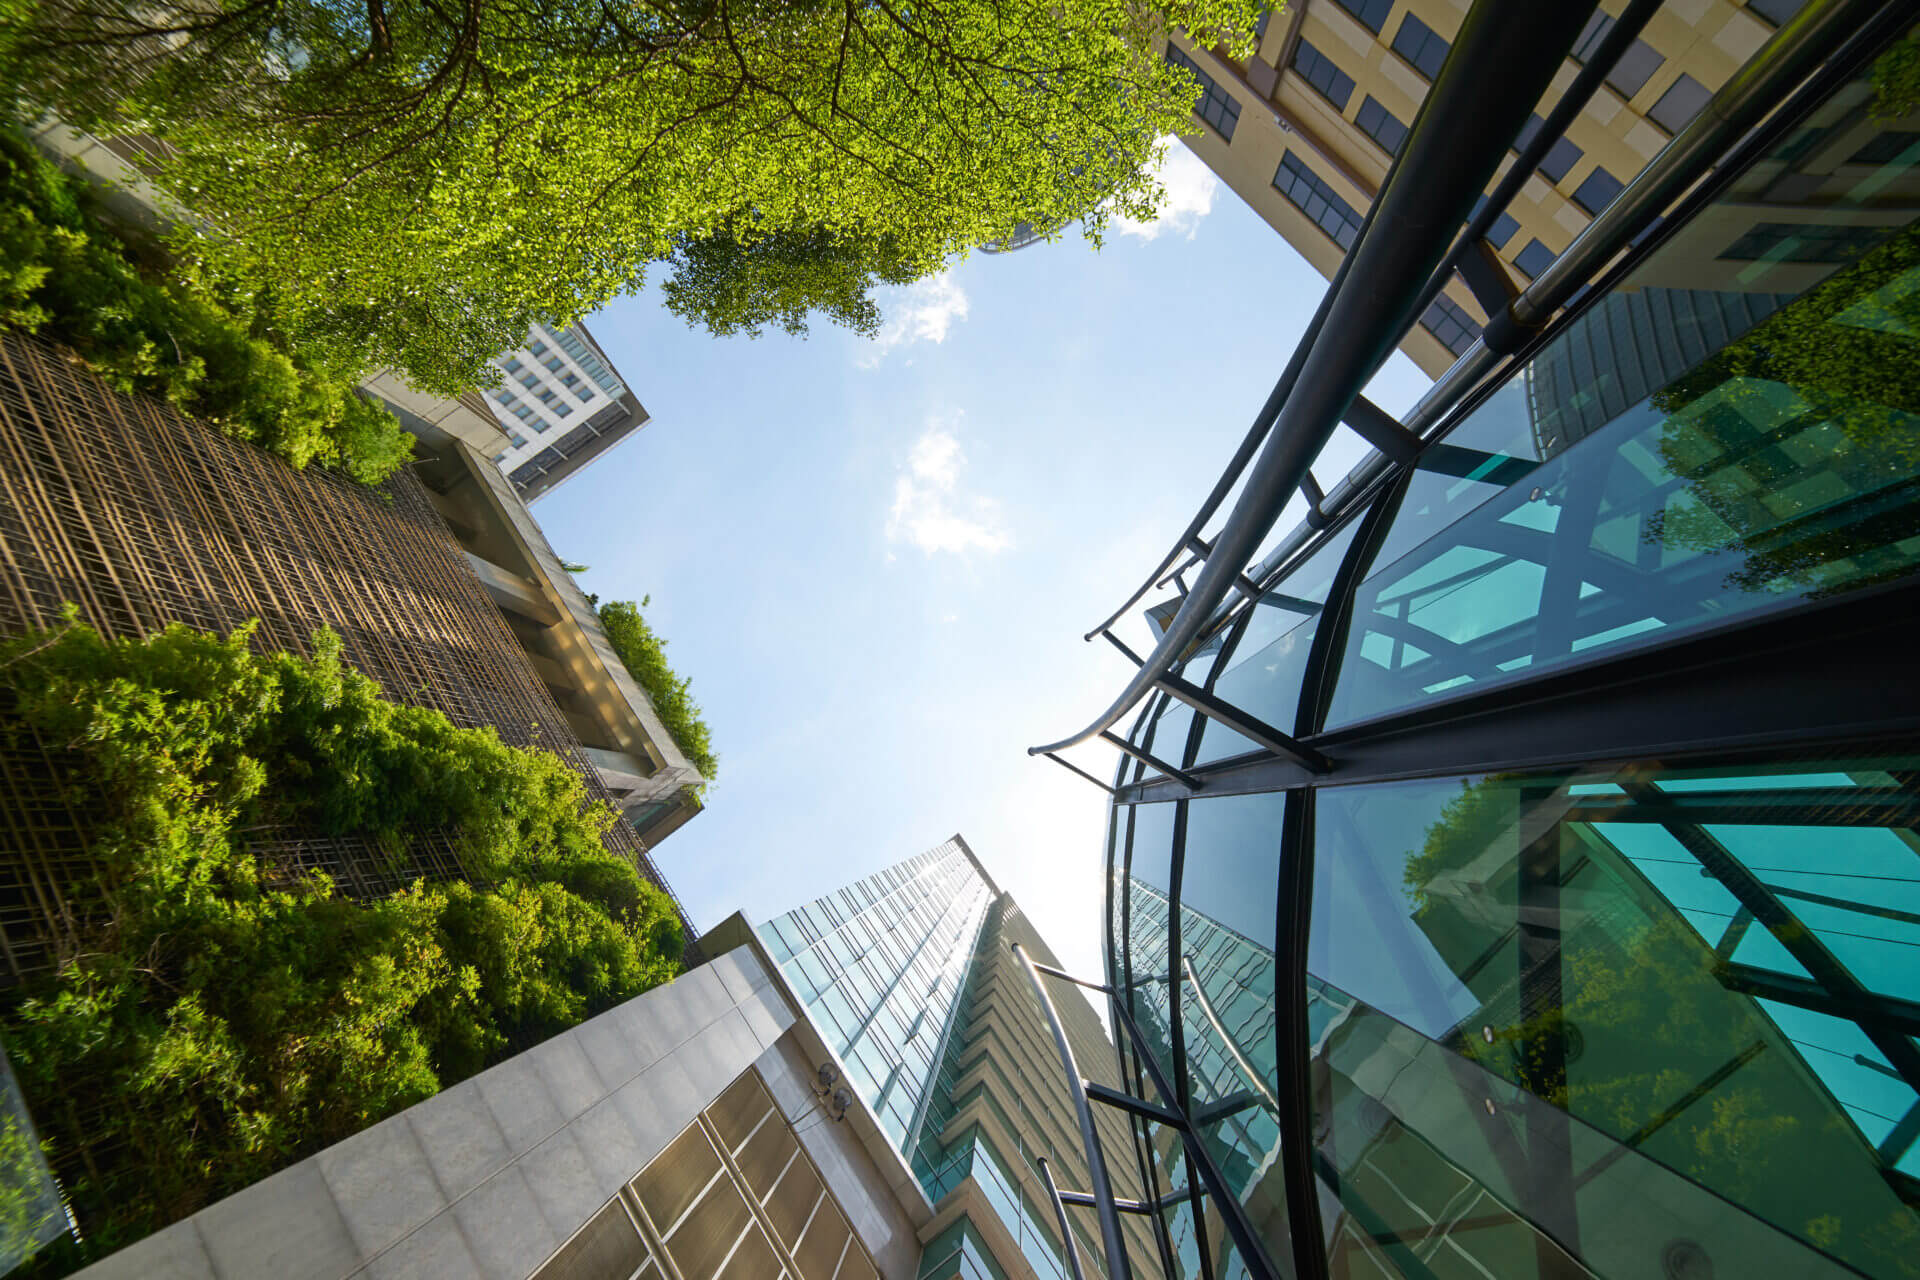 Low angle shot of modern glass buildings and green with clear sky